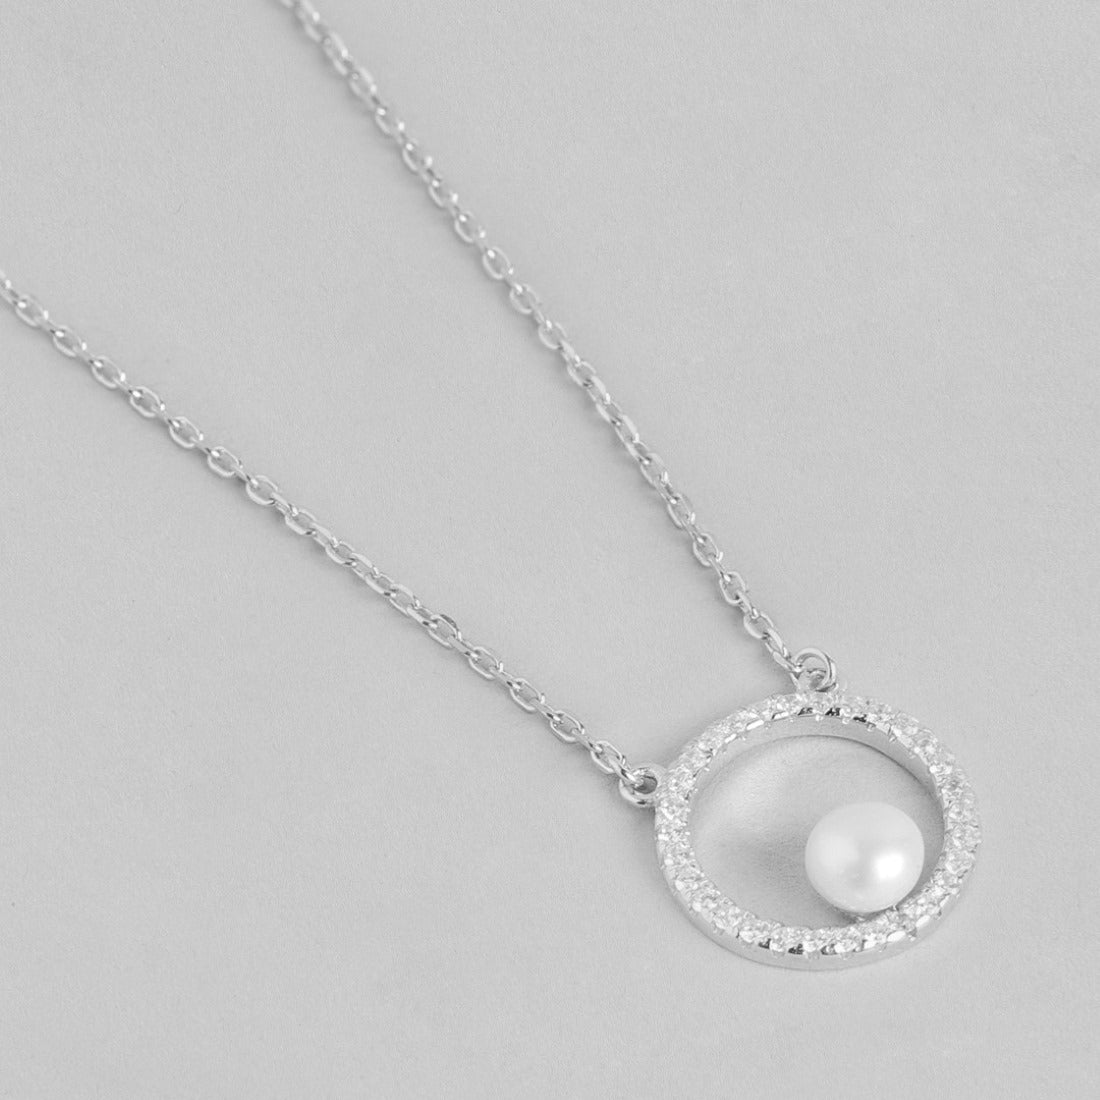 Circular Radiance Pearl Rose Gold-Plated 925 Sterling Silver Necklace